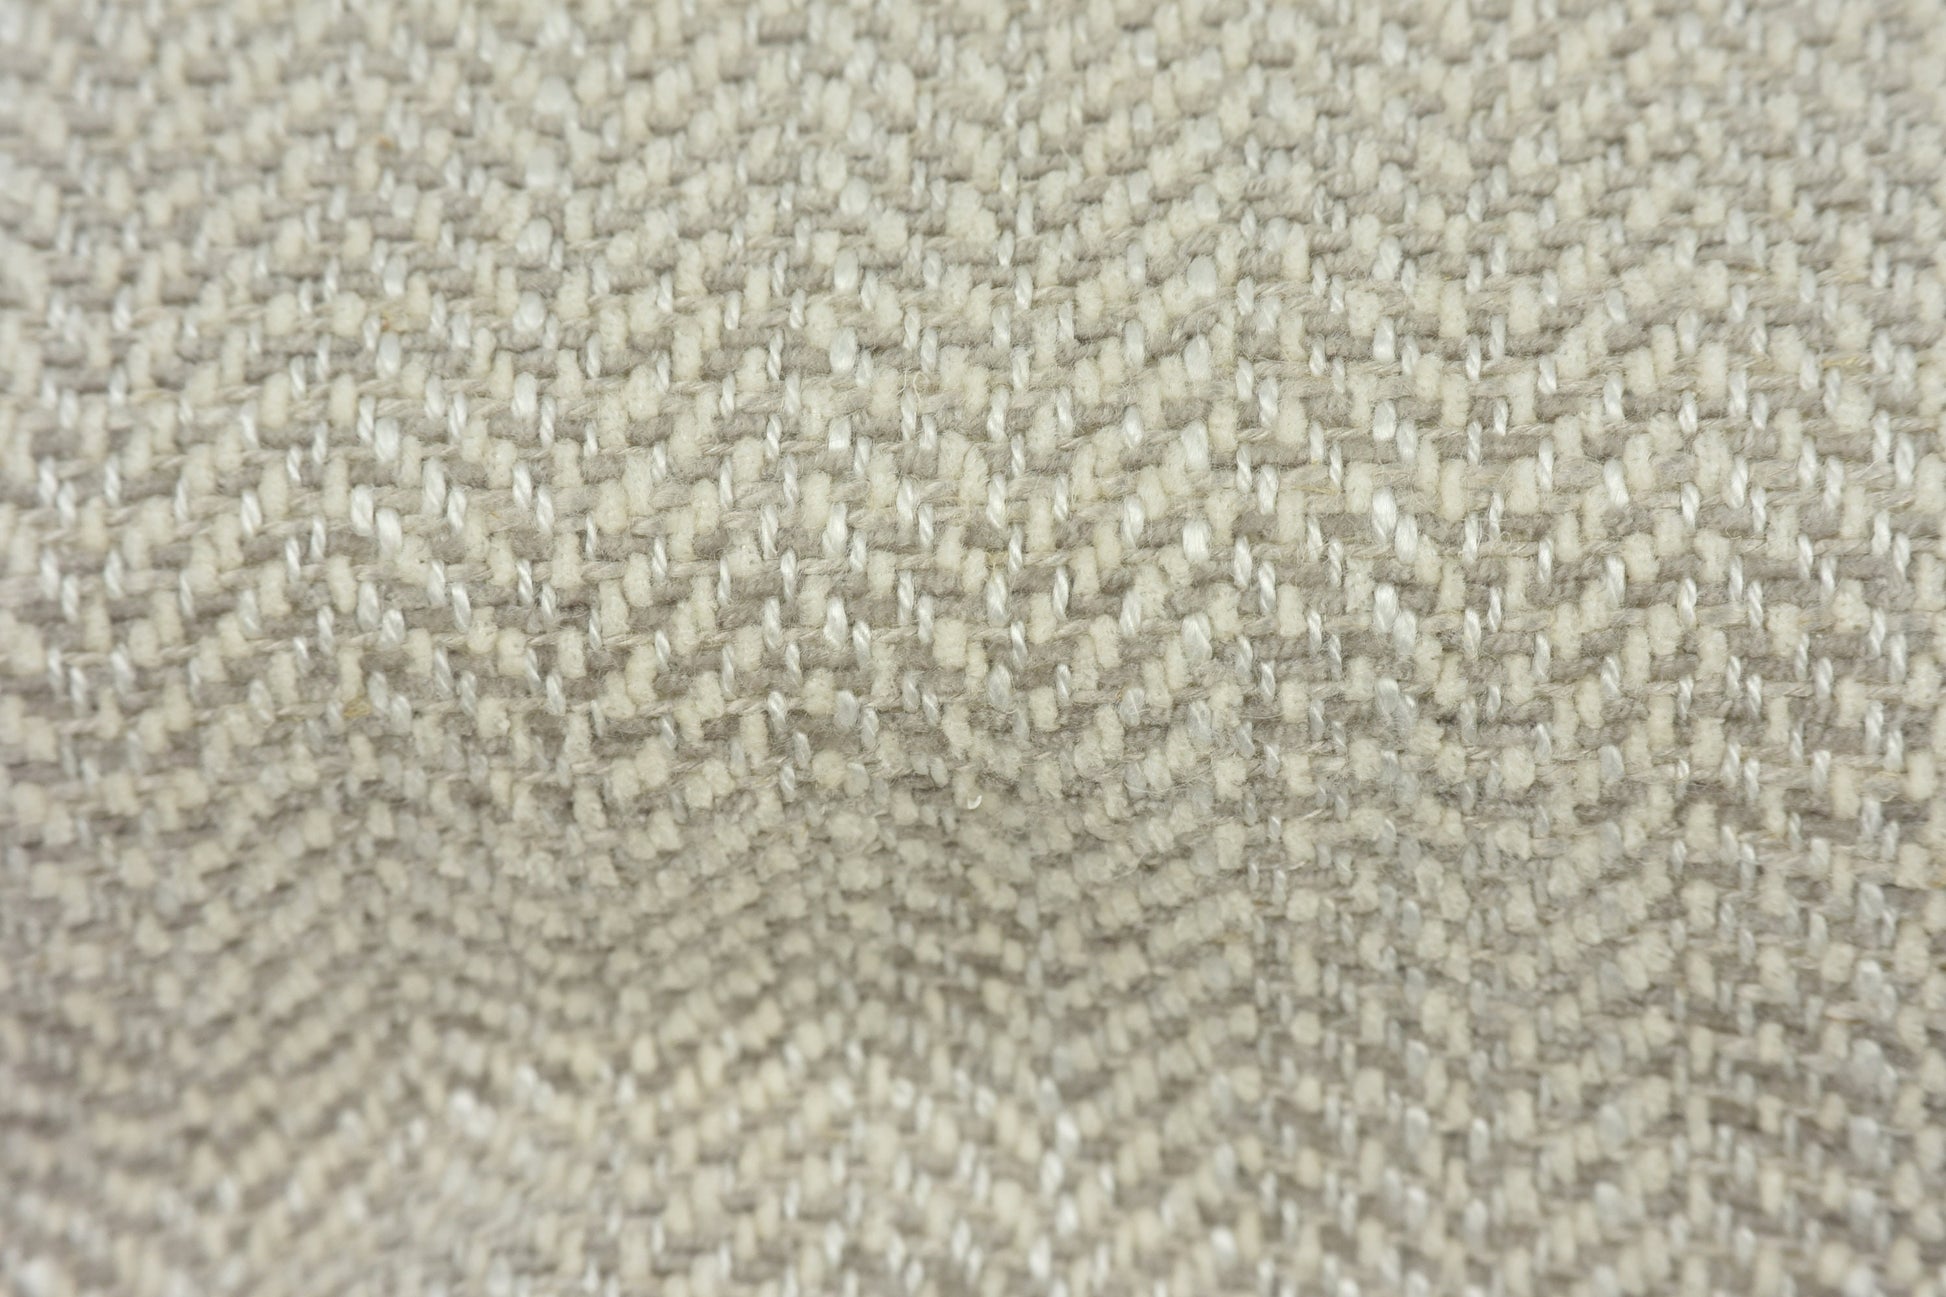 Heavy Weight Vintage Linen Blended Zigzag Taupe White Herringbone Upholstery Fabric By The Yard For Headboard,Cushion,Ottoman,Furniture